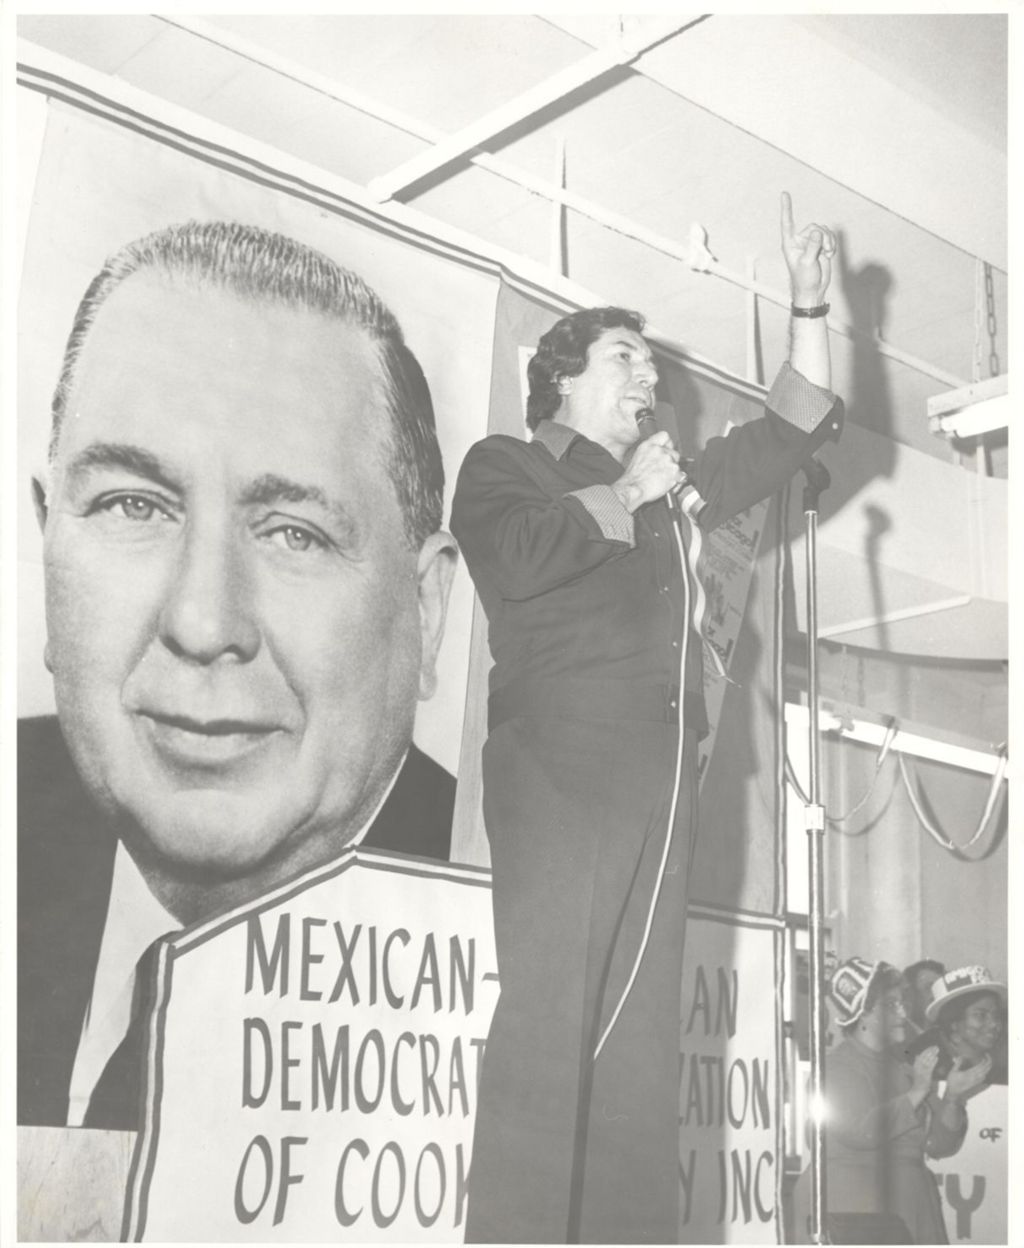 Speaker at Mexican-American Democratic Organization of Cook County event